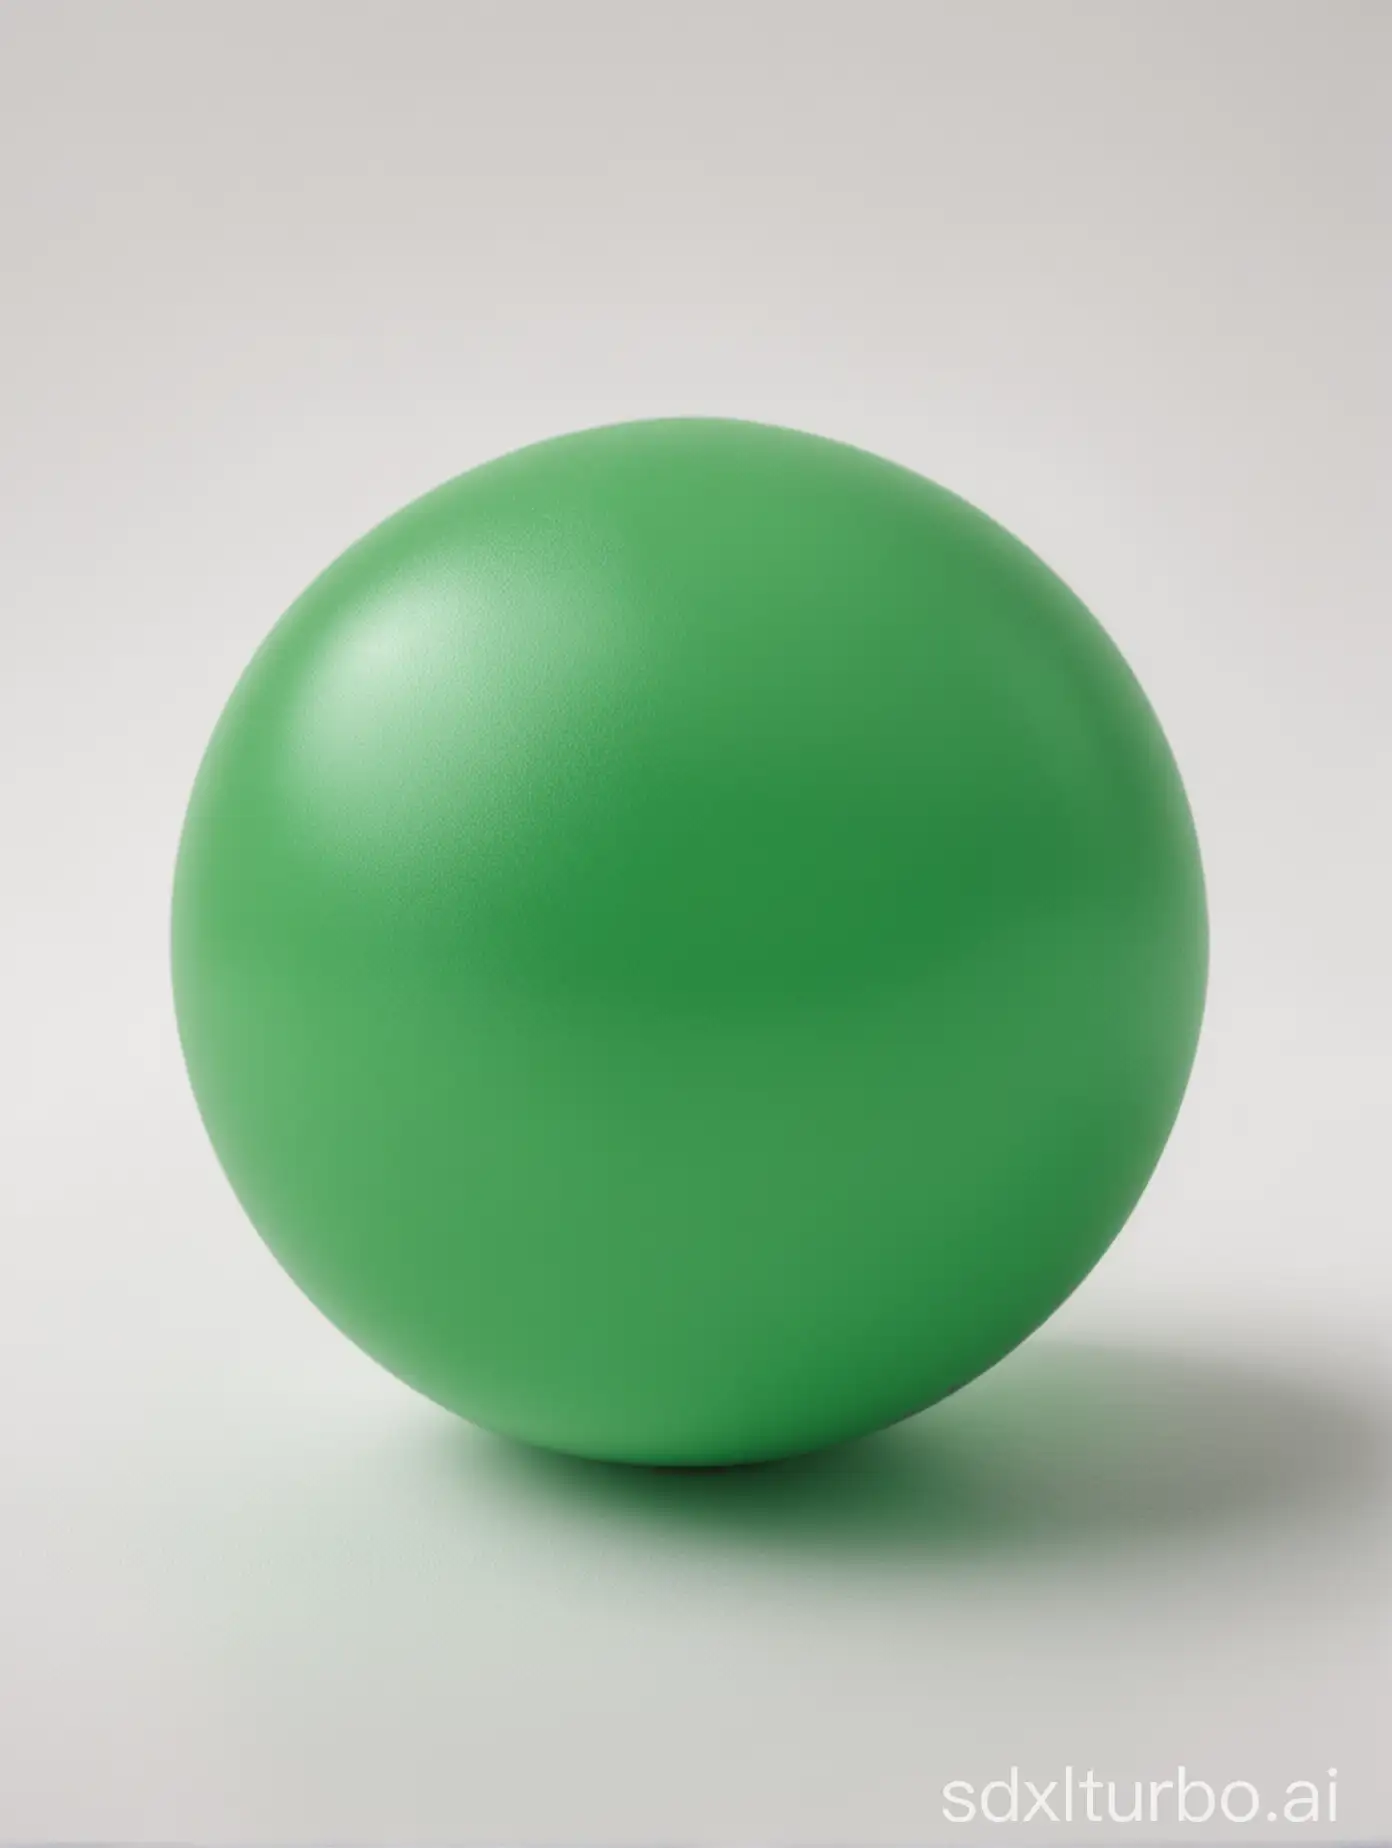 green round ball, plastic smooth feel, white background